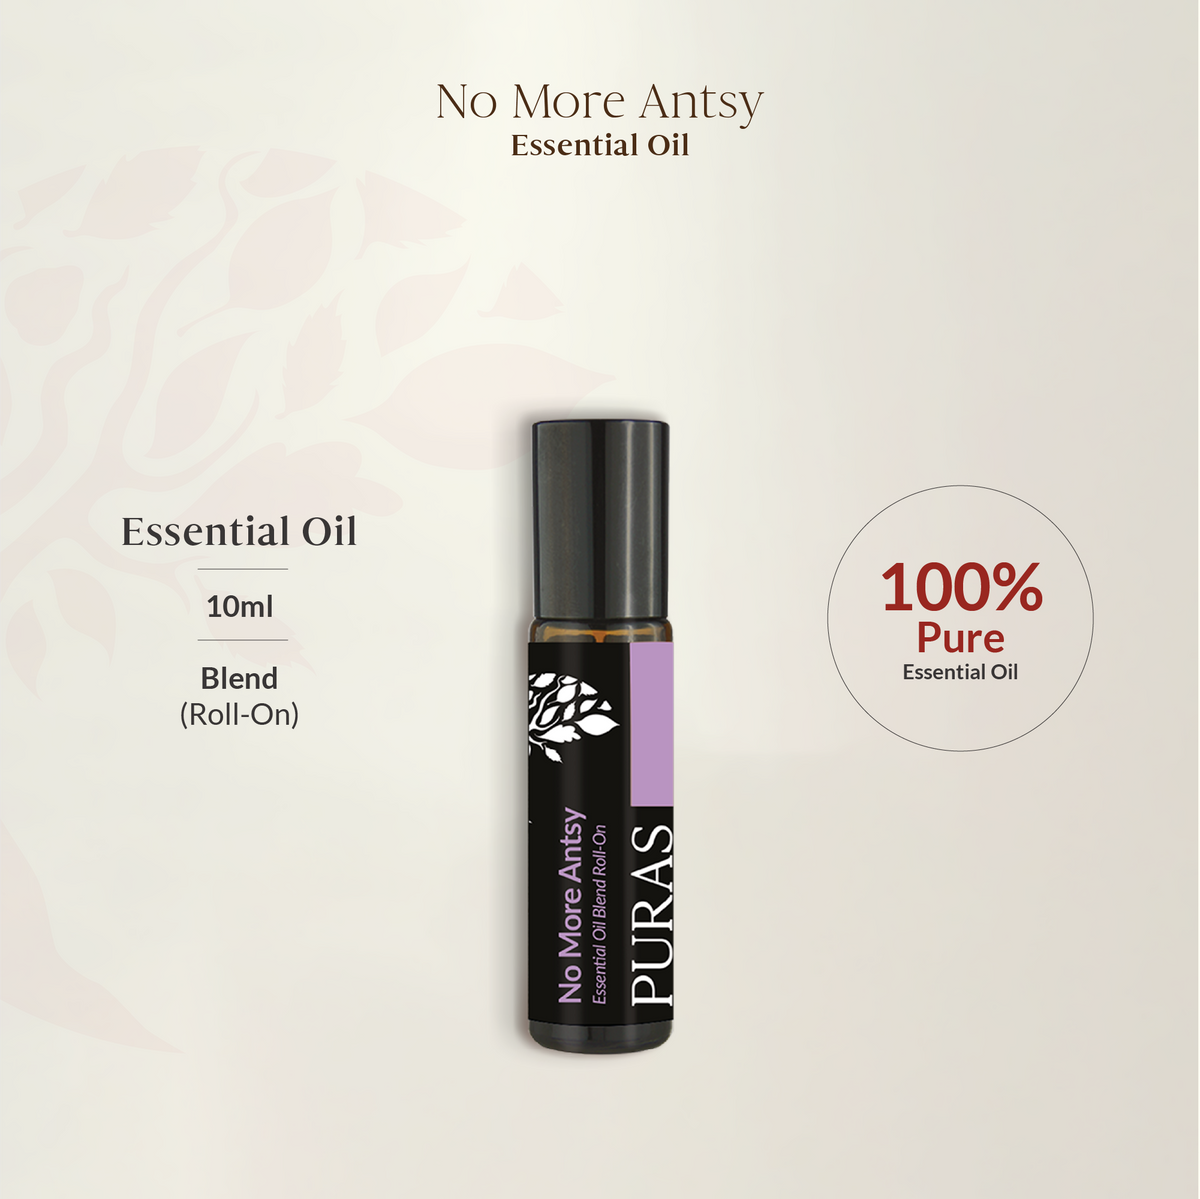 No More Antsy Essential Oil Blend (Roll-On) 10ml